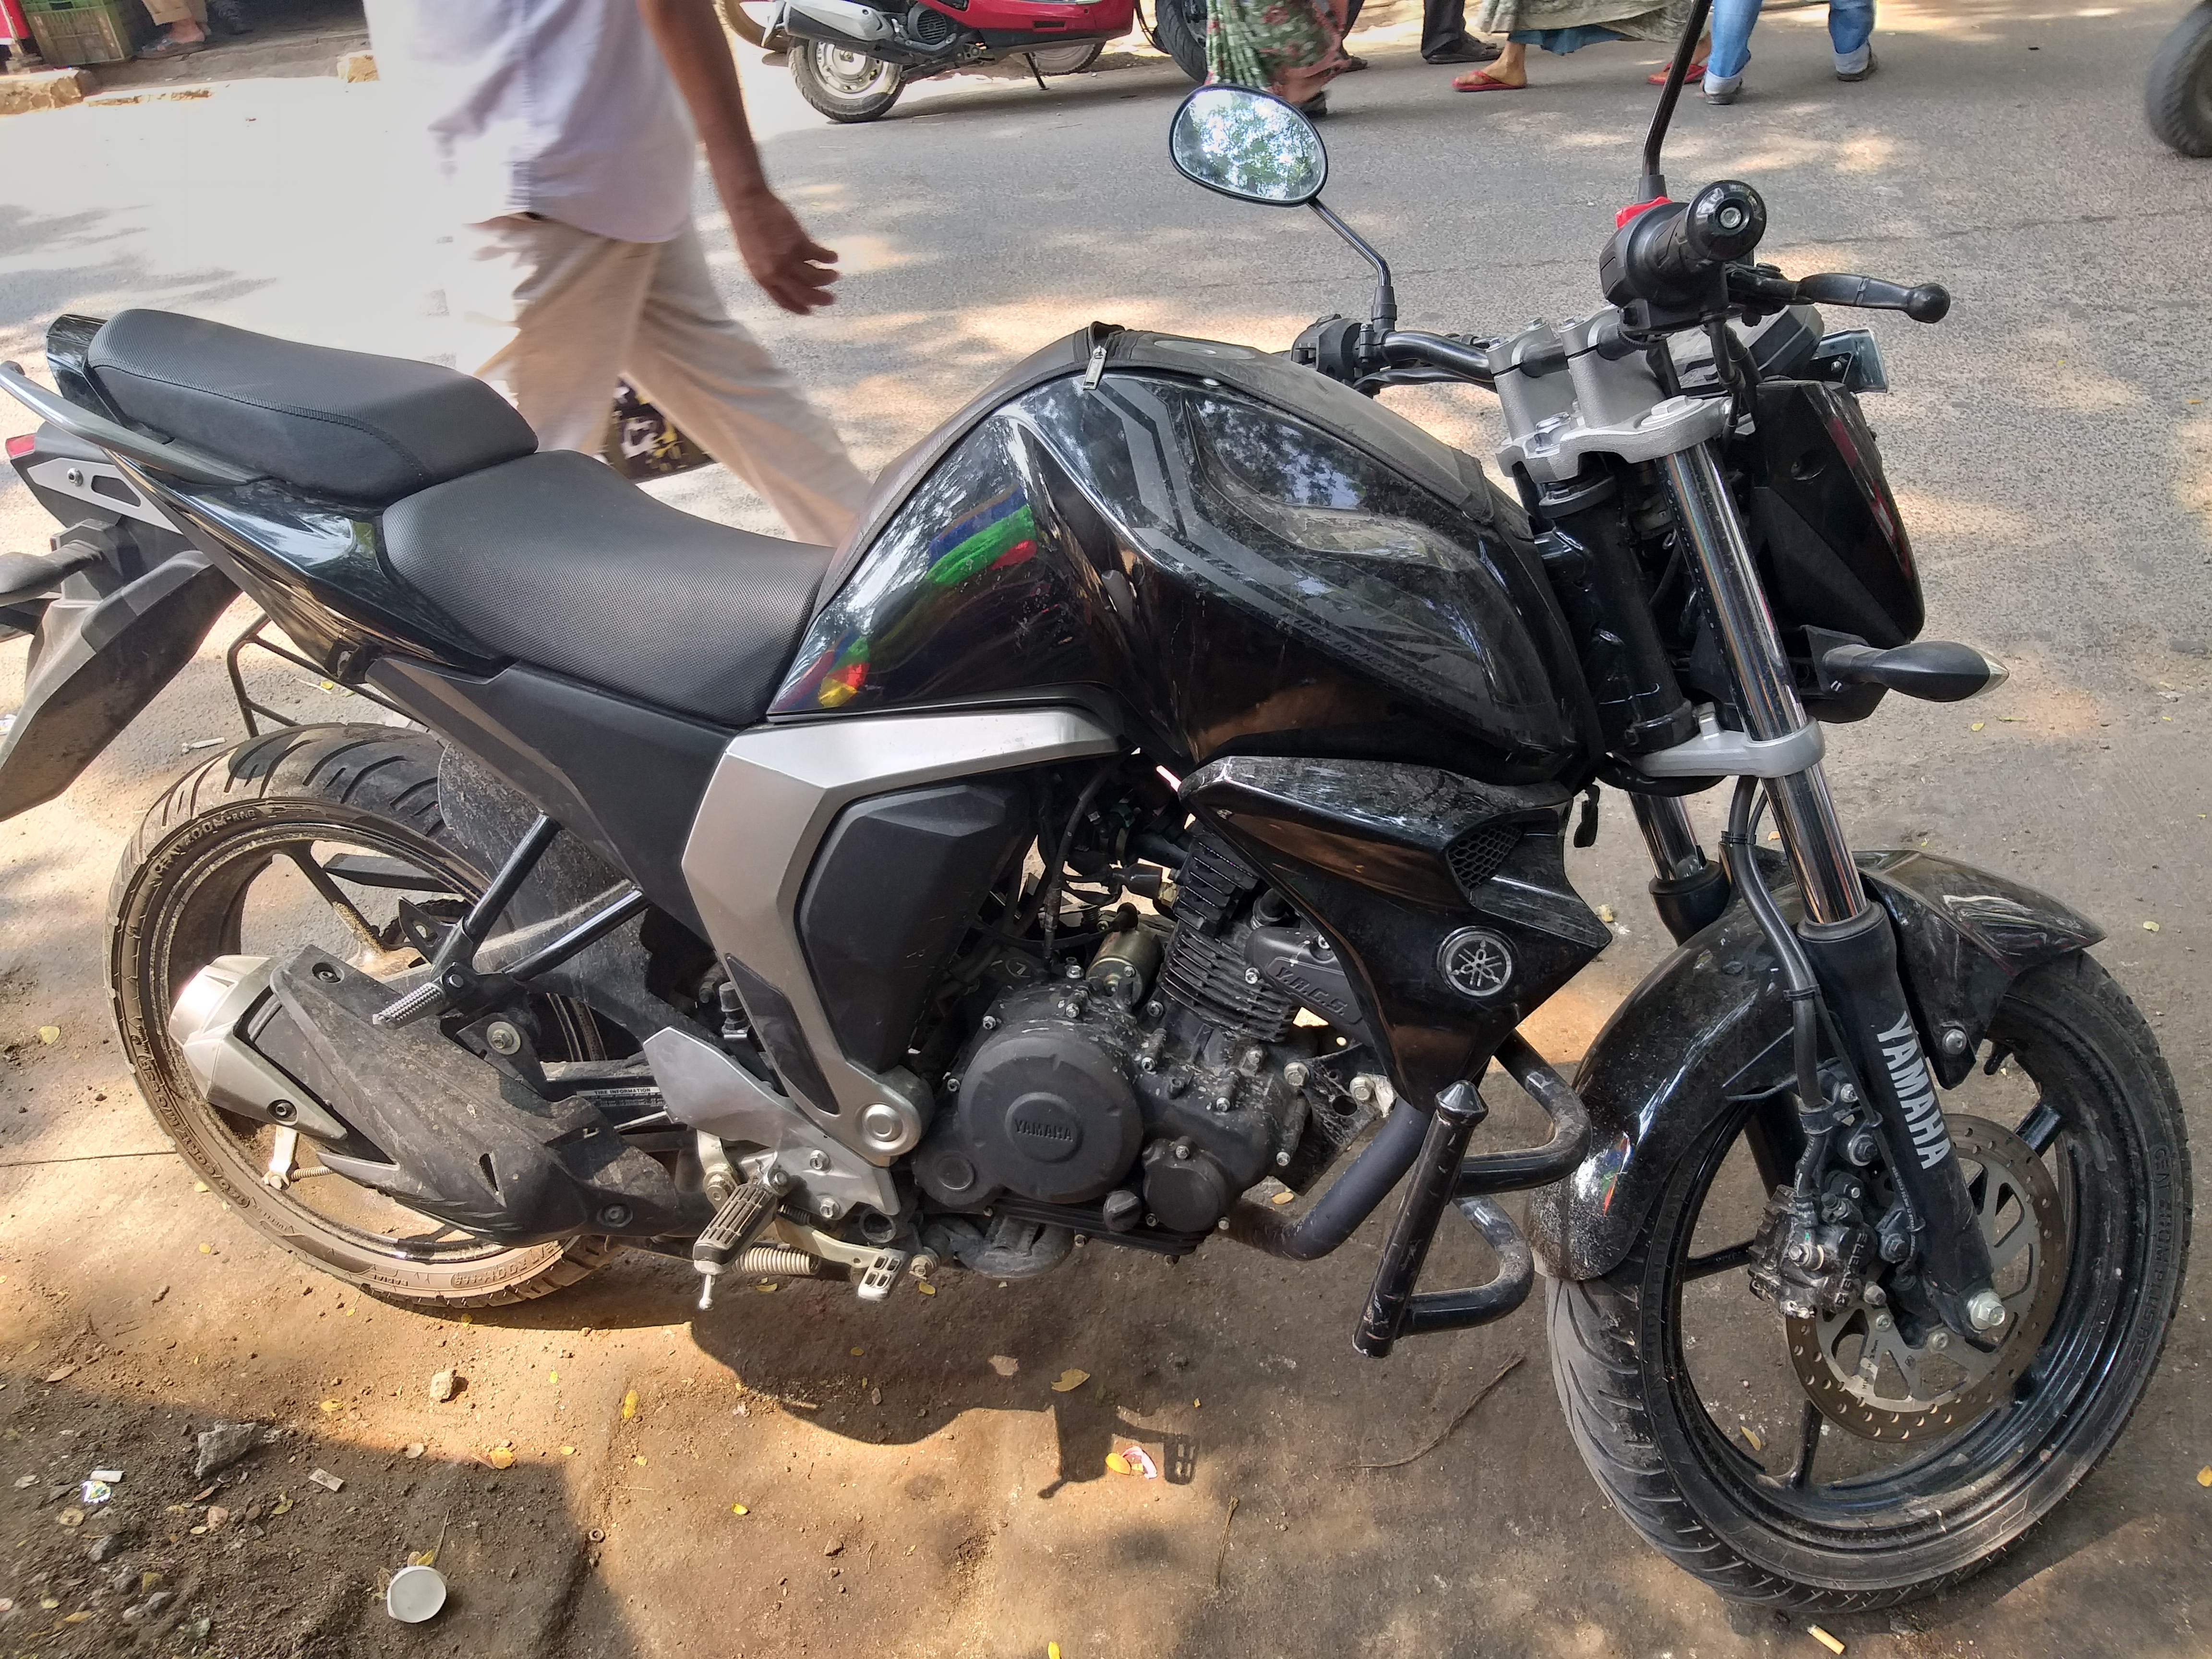 Used 2018 model Yamaha FZ-S for sale in Hyderabad. ID 193711 - Bikes4Sale